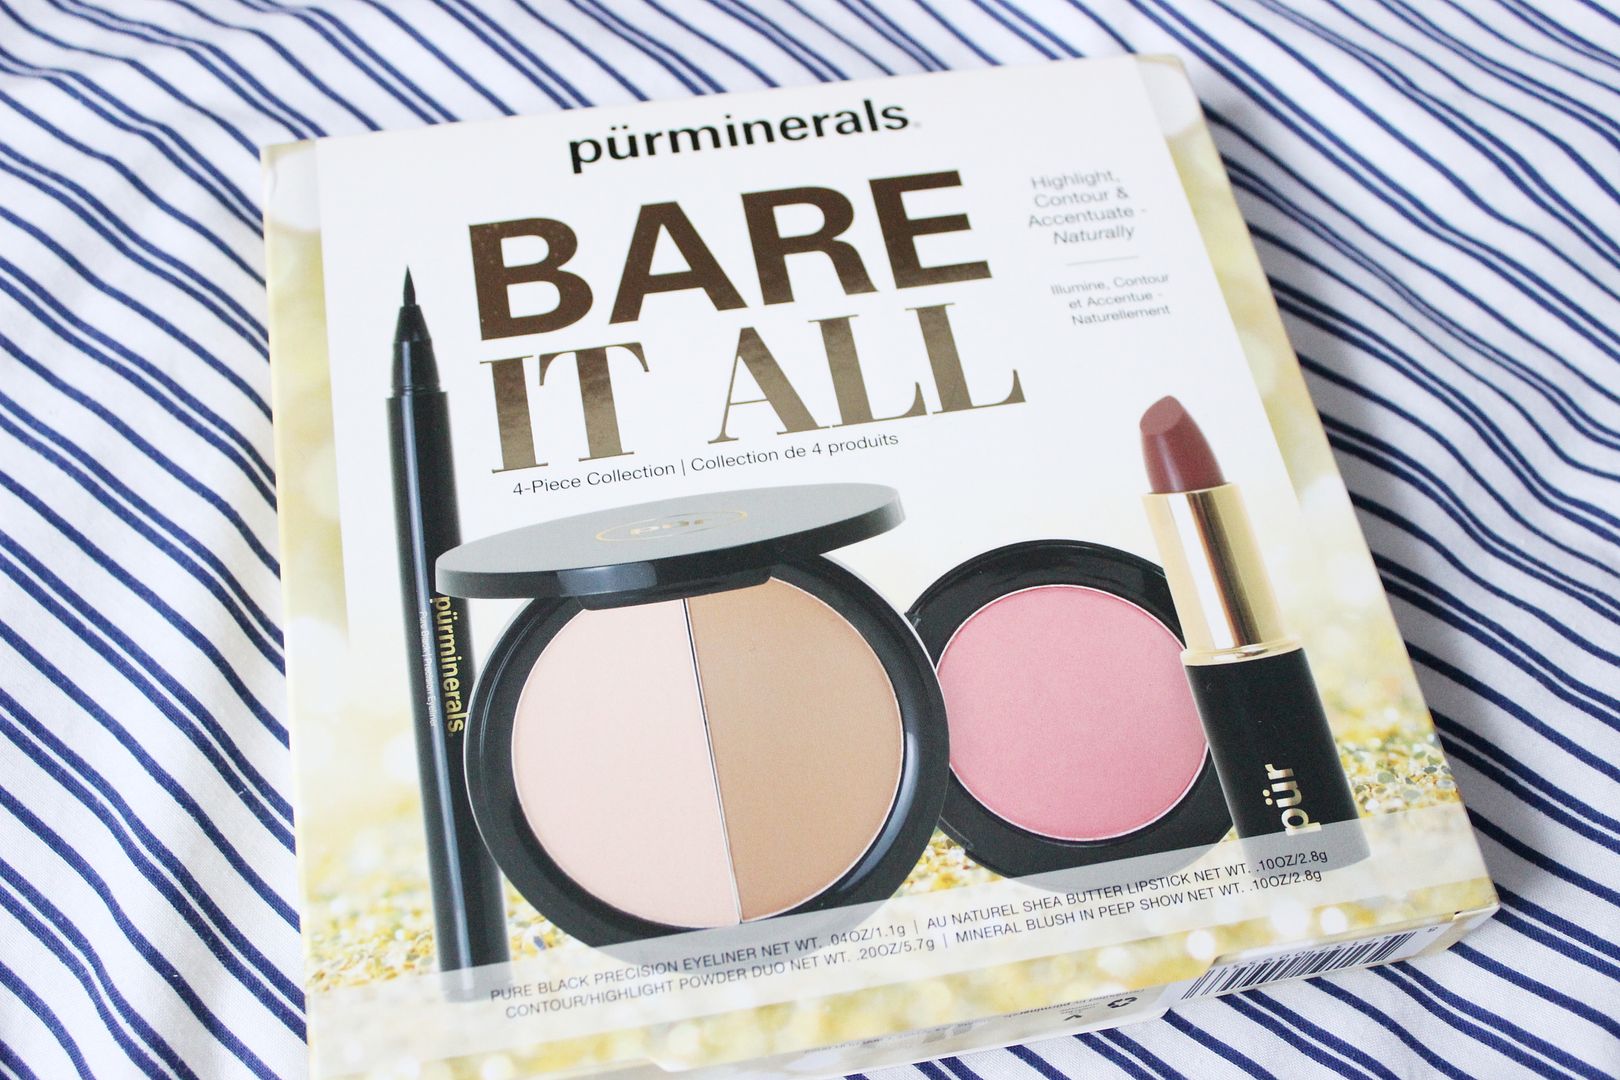 Pürminerals Bare It All Collection 